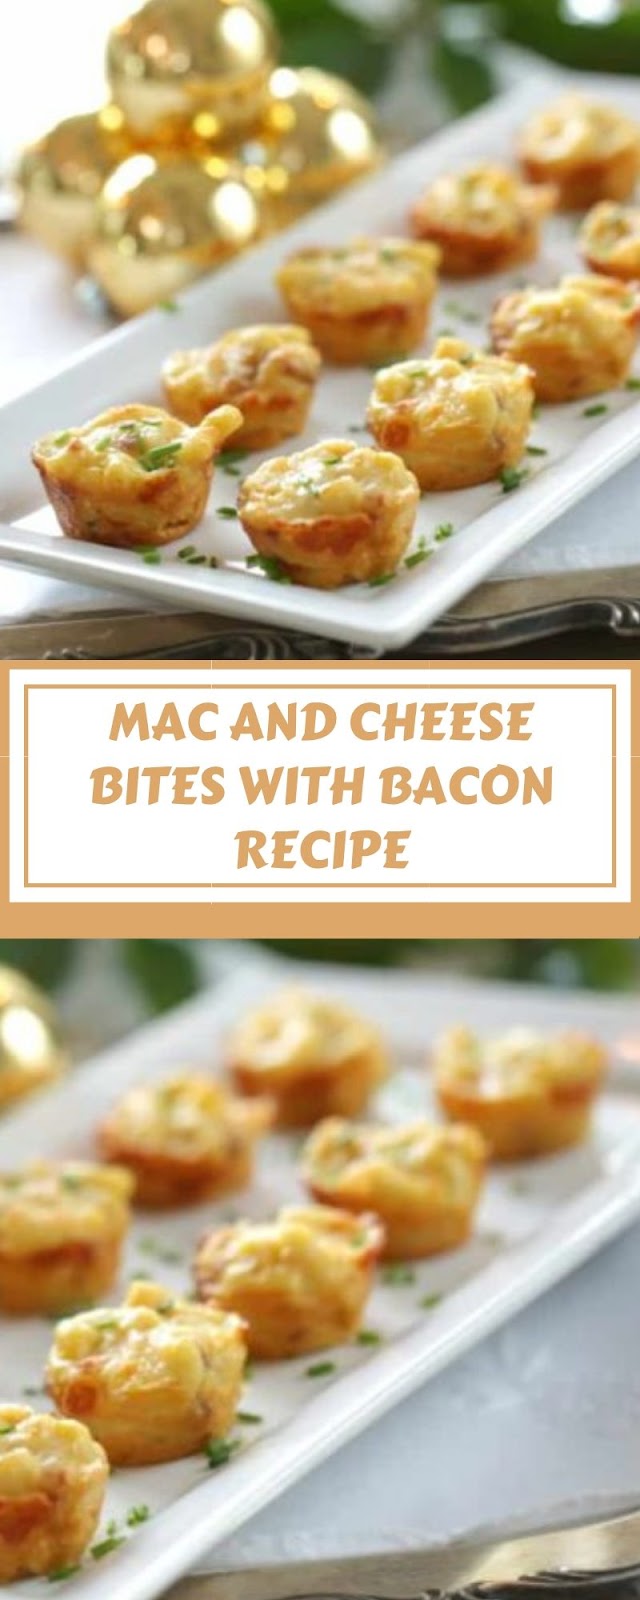 MAC AND CHEESE BITES WITH BACON RECIPE